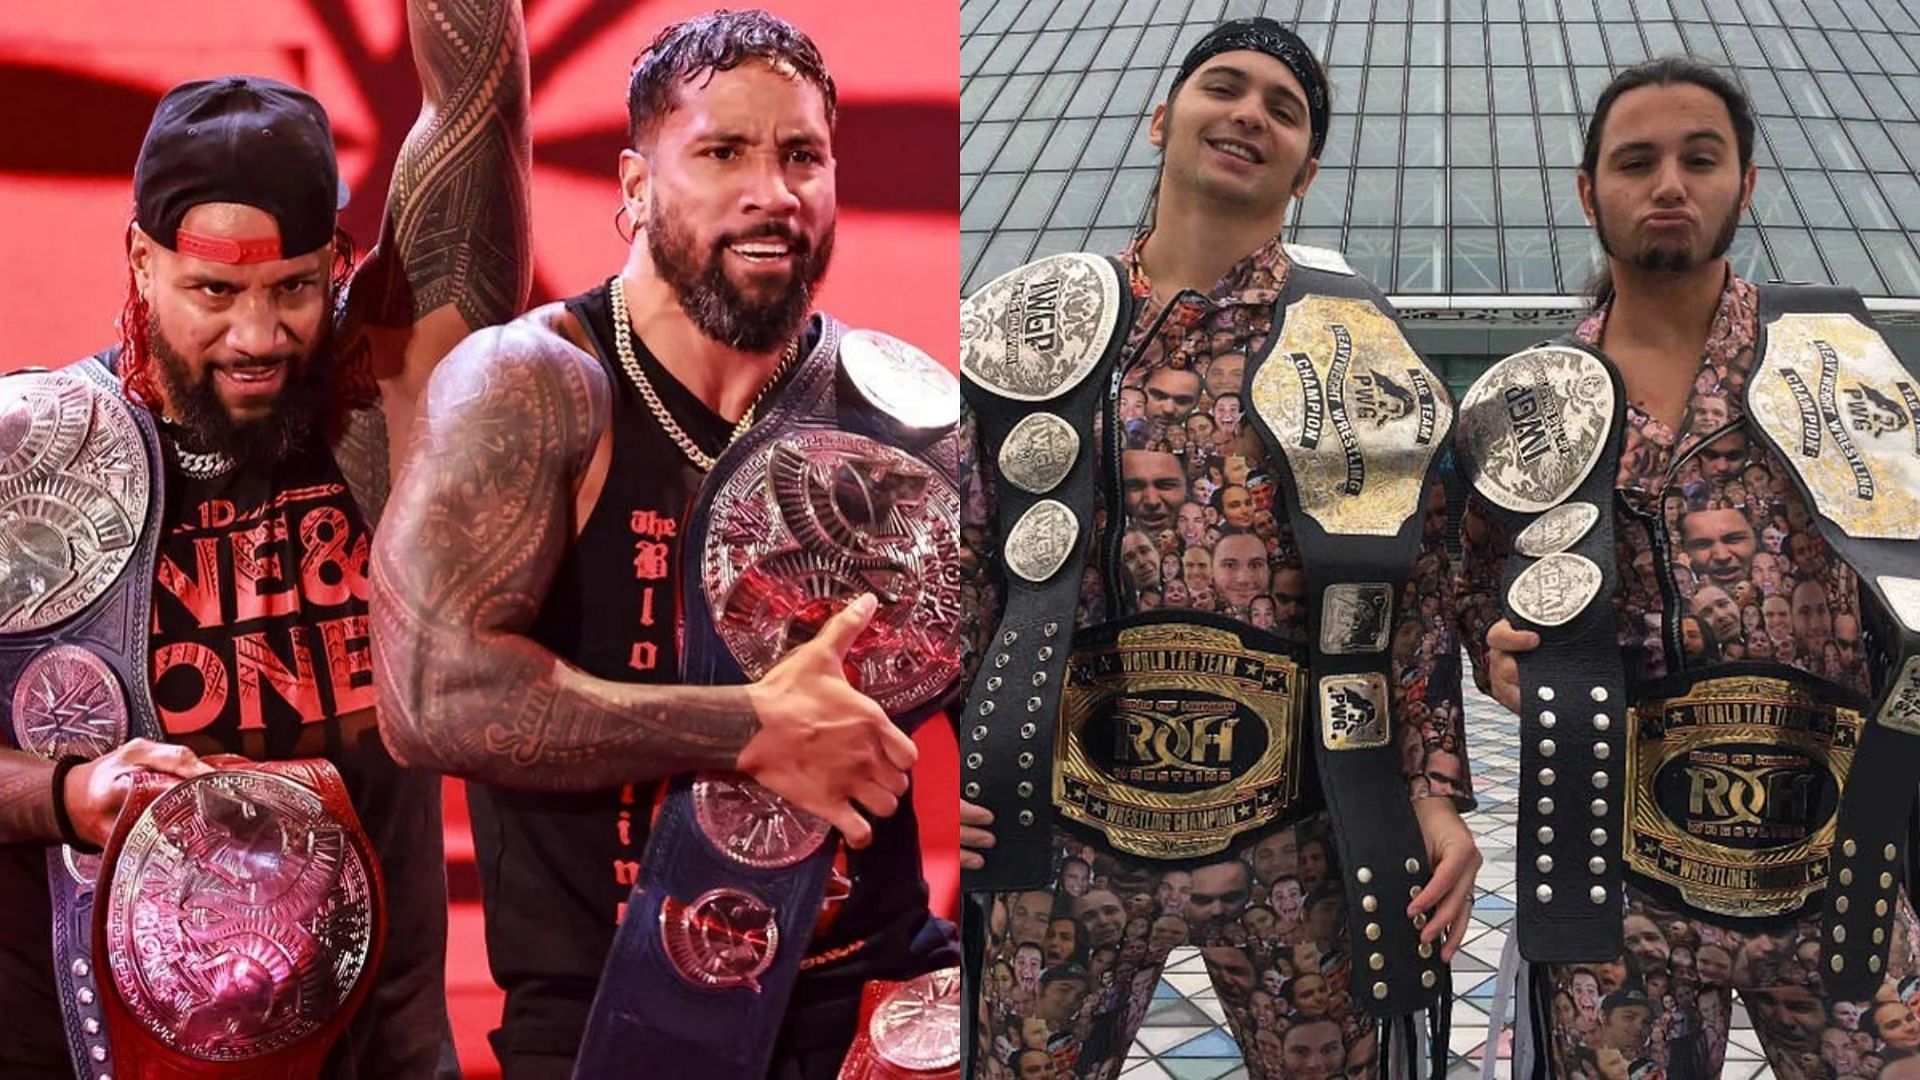 Are The Usos more legitimate than The Young Bucks?